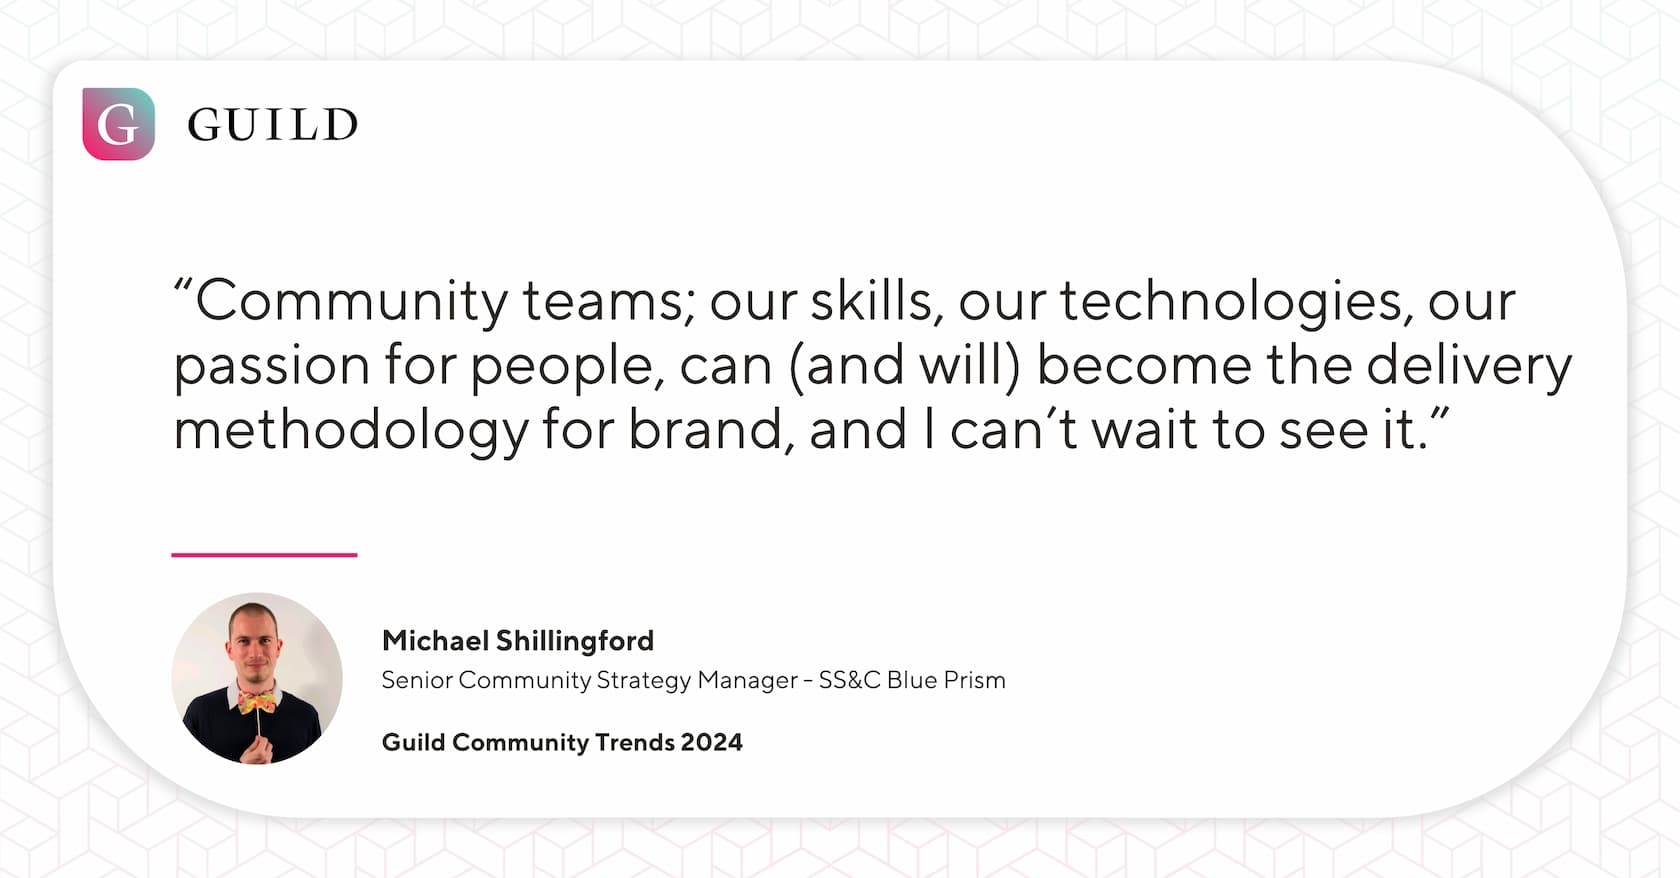 A quote from Michael Shillingford reading "“Community teams; our skills, our technologies, our passion for people, can (and will) become the delivery methodology for brand, and I can’t wait to see it.”"